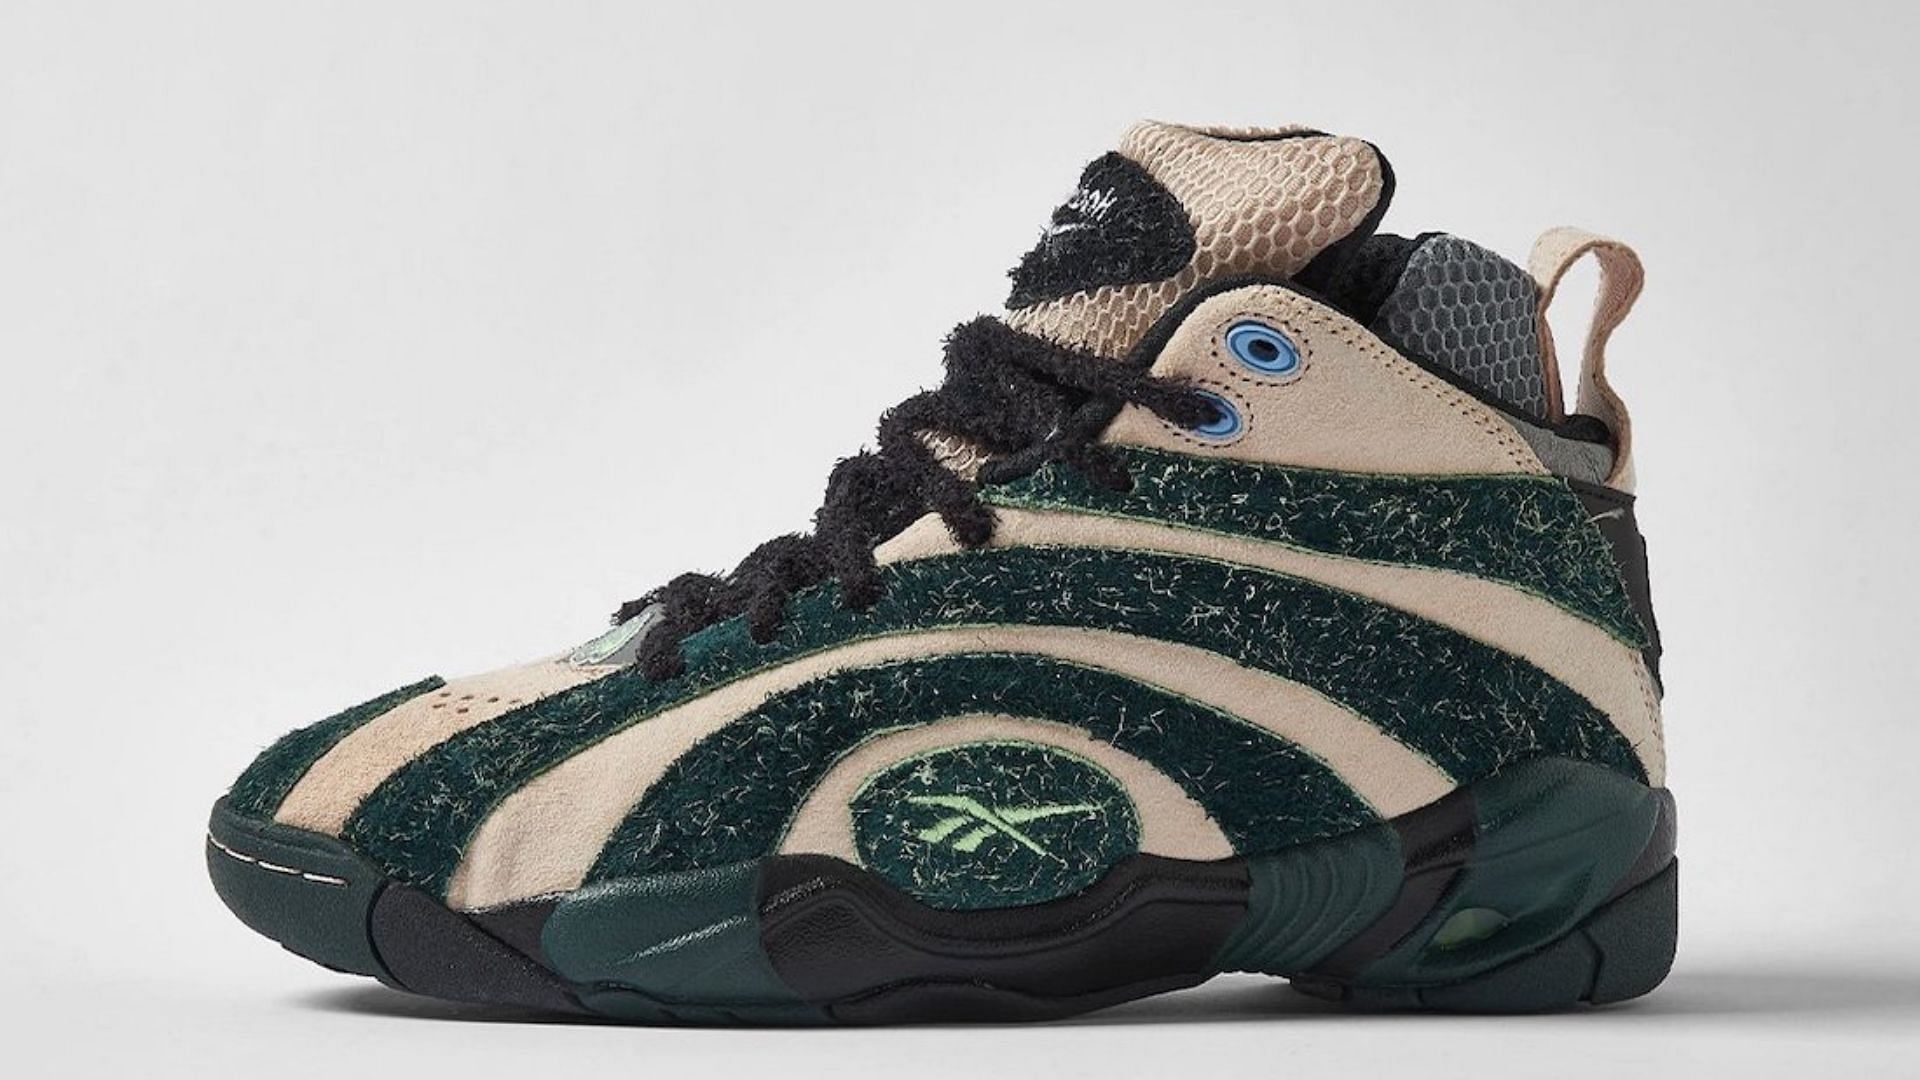 Take a closer look at the upcoming Brain Dead x Reebok Shaqnosis shoes (Image via END. Clothing)